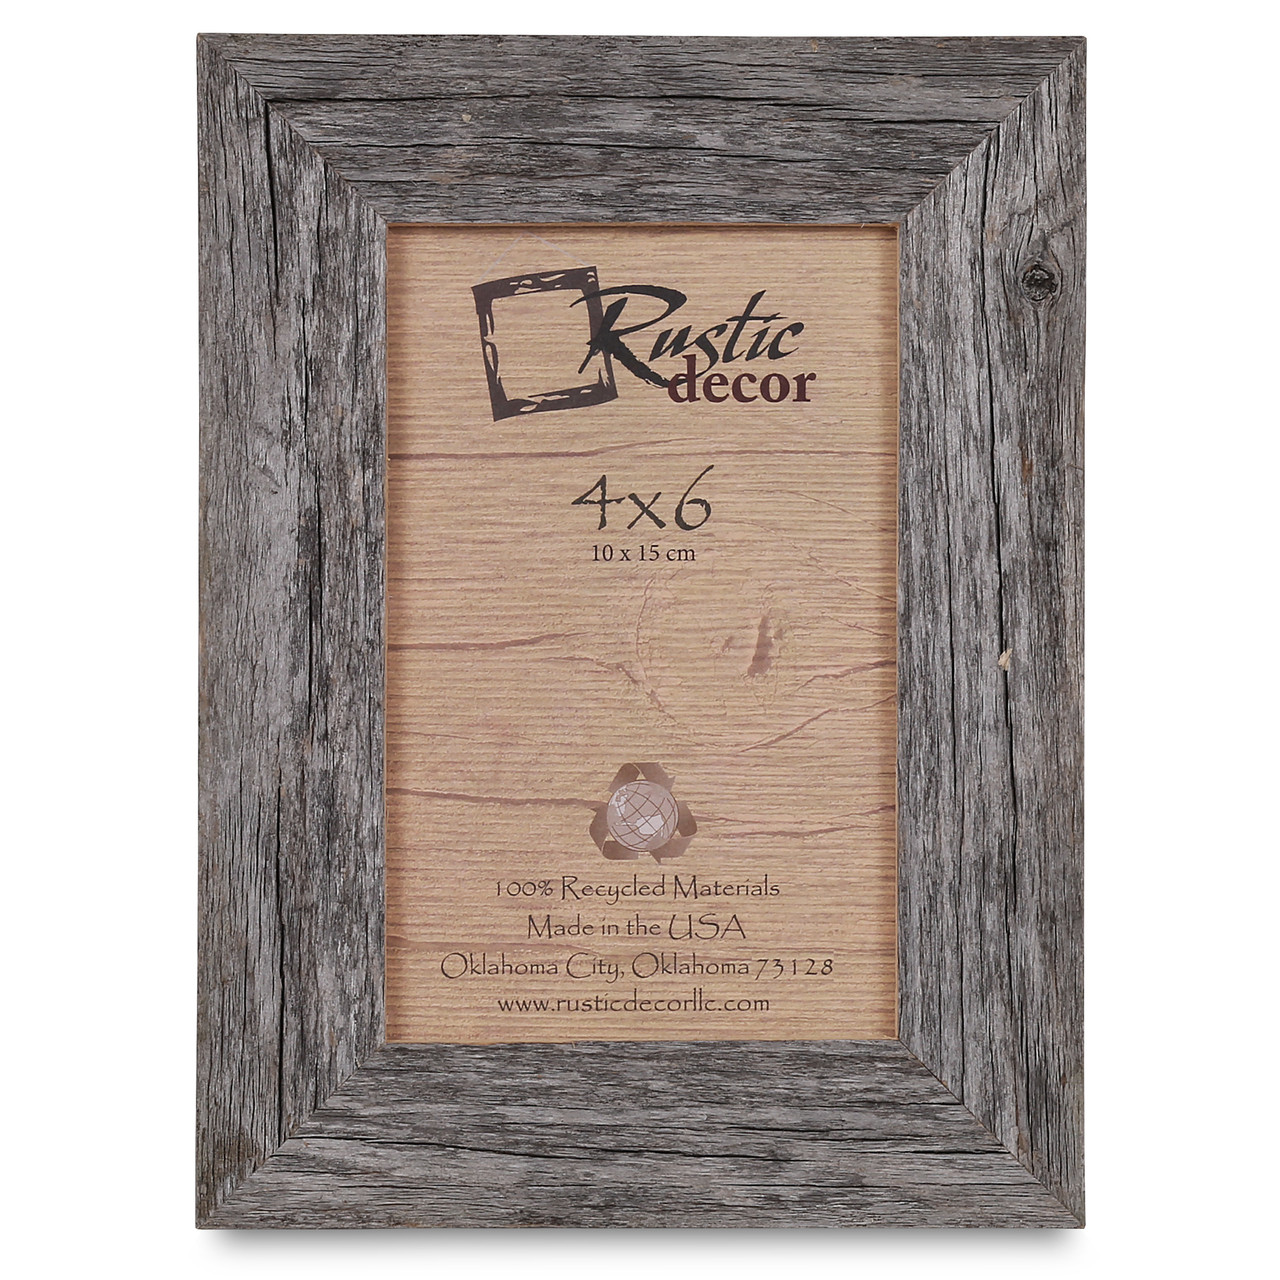 Wedding Planners Special  25 - 4x6 Rustic Reclaimed Barn Wood Standard  Photo Frame - Rustic Decor